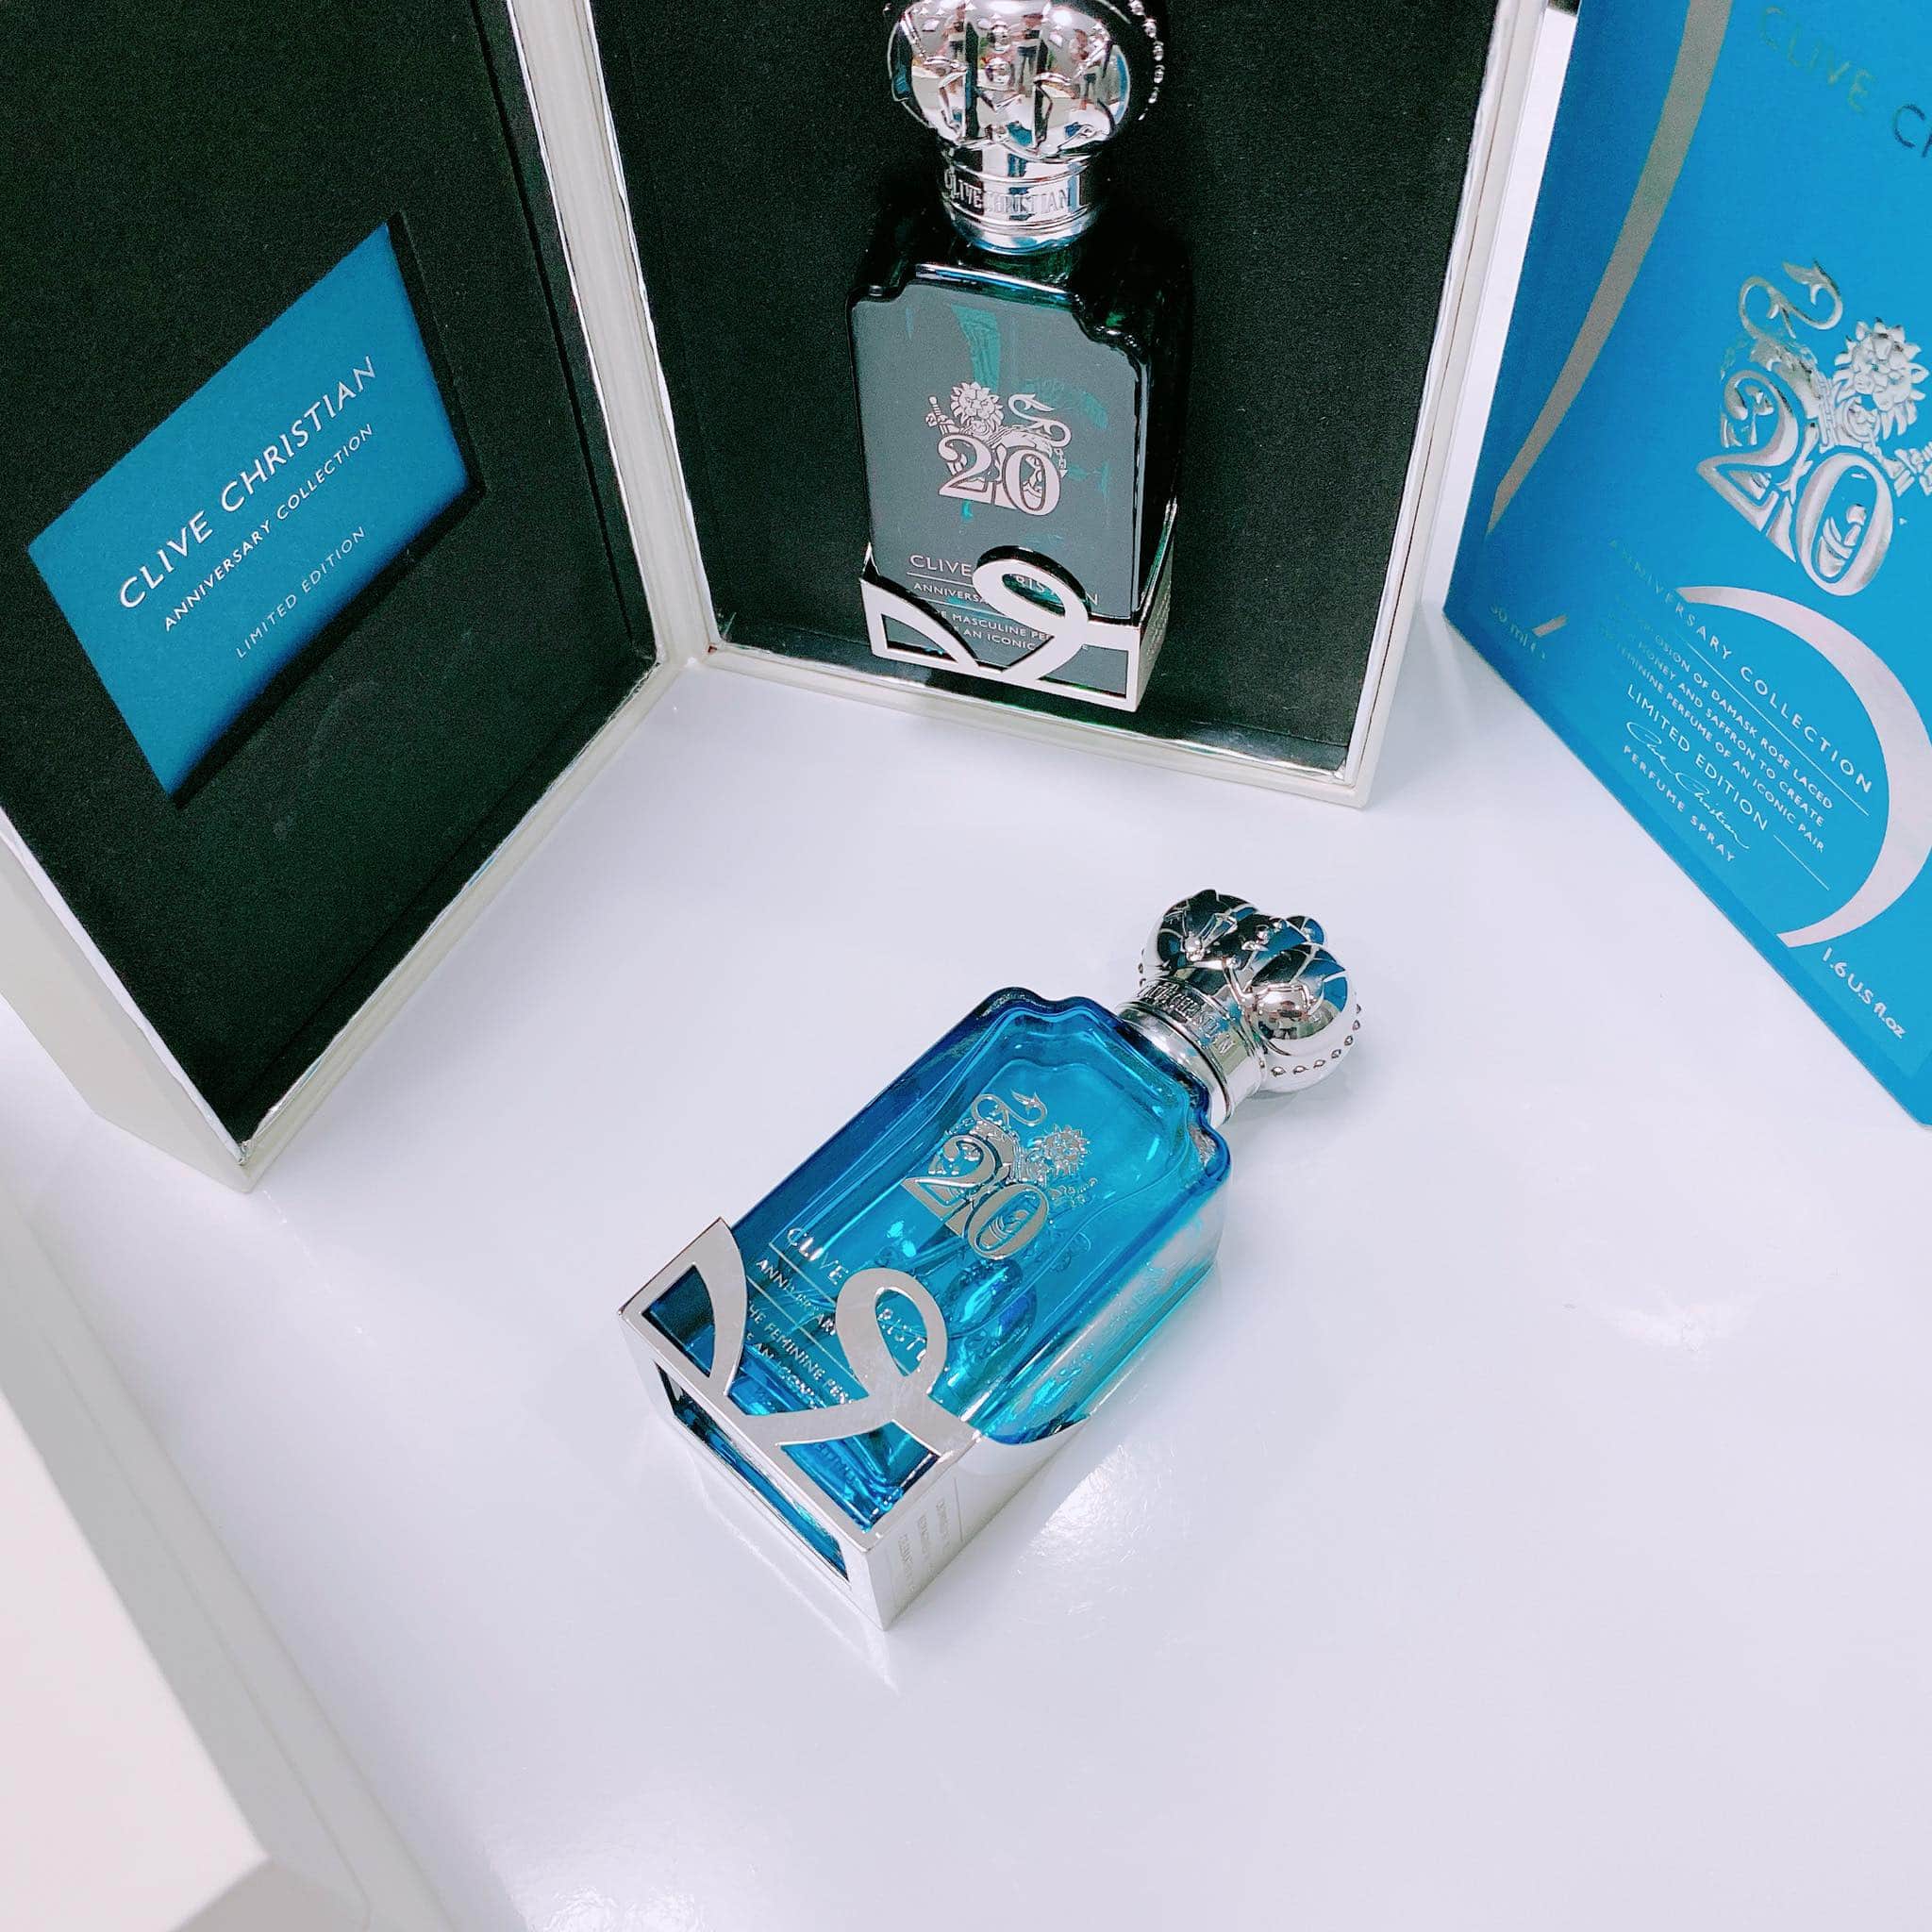 Nước hoa Clive Christian 20th Anniversary Iconic Limited Edition